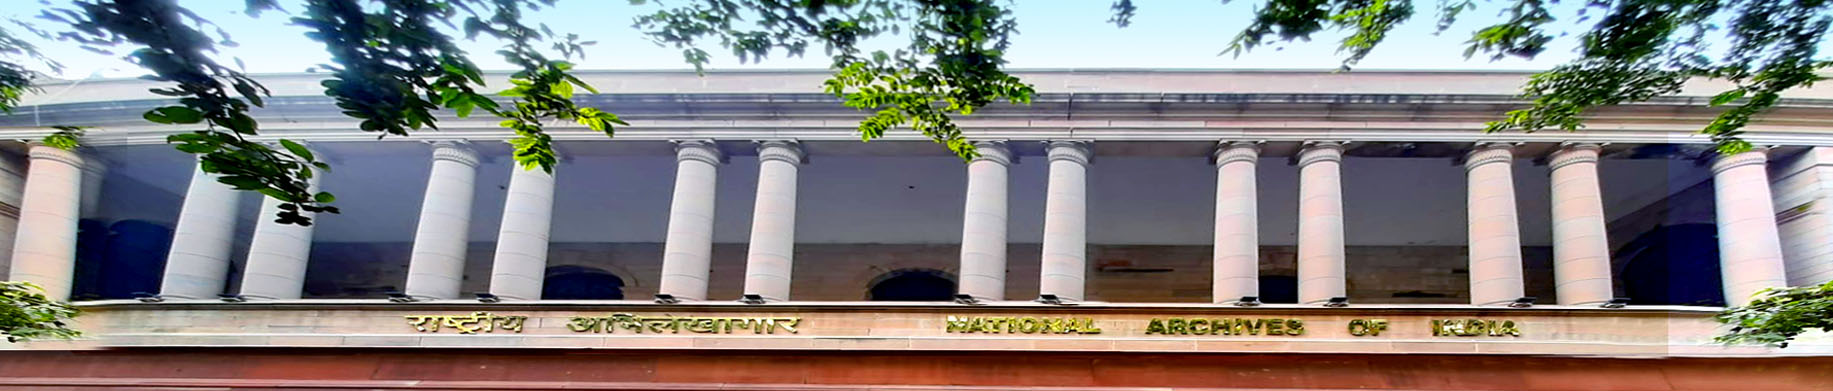 Financial Assistance of National Archives